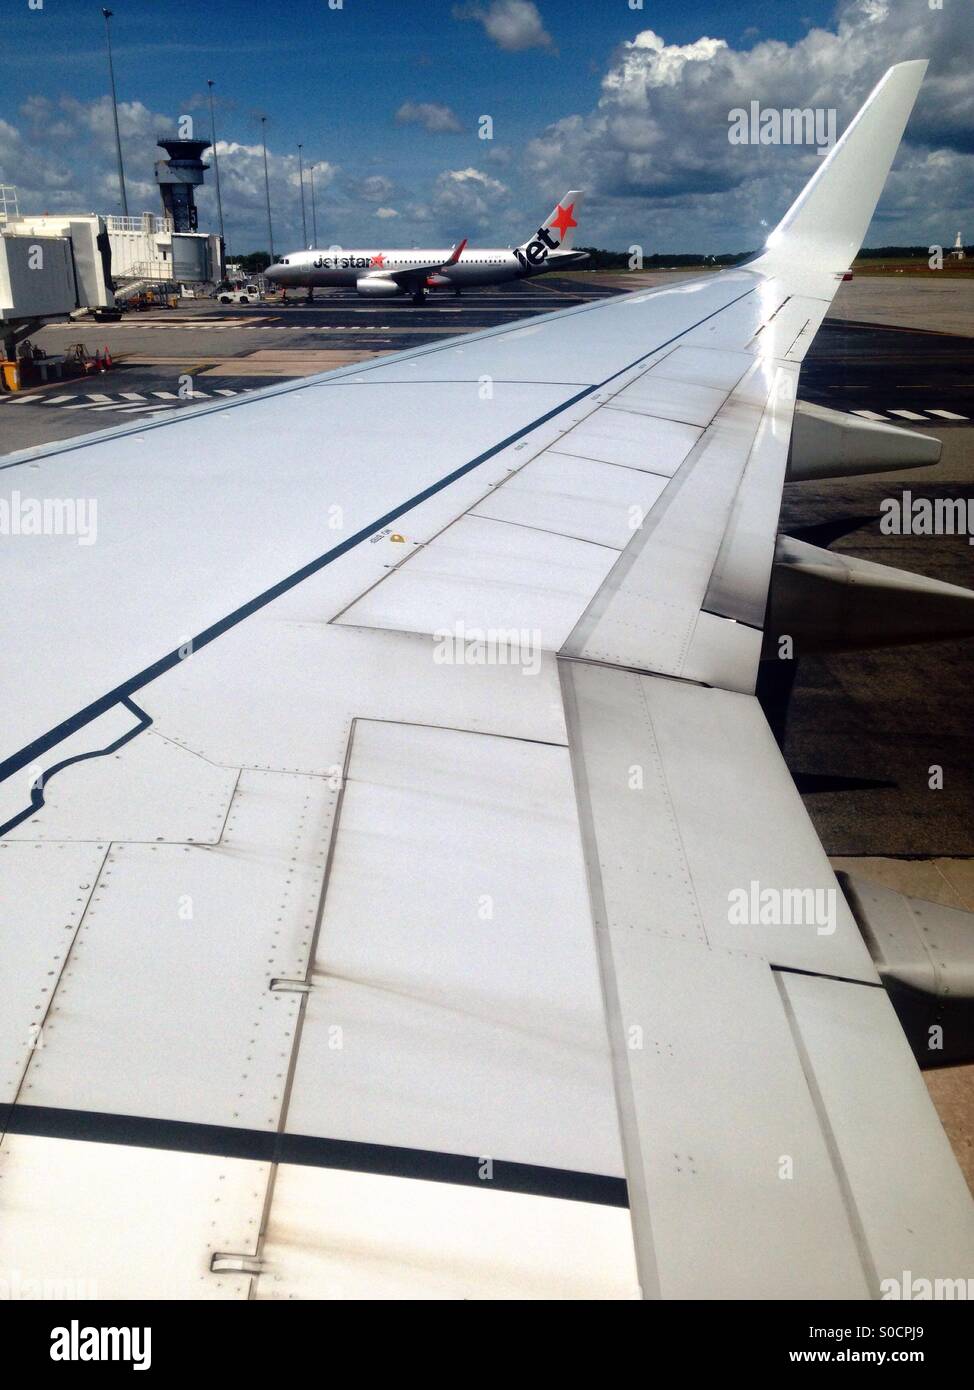 A Jetstar plane, the Australian low cost airline carrier, seen from the window of another airplane at the Darwin International Airport. Darwin, Northern Territory, Australia. Stock Photo